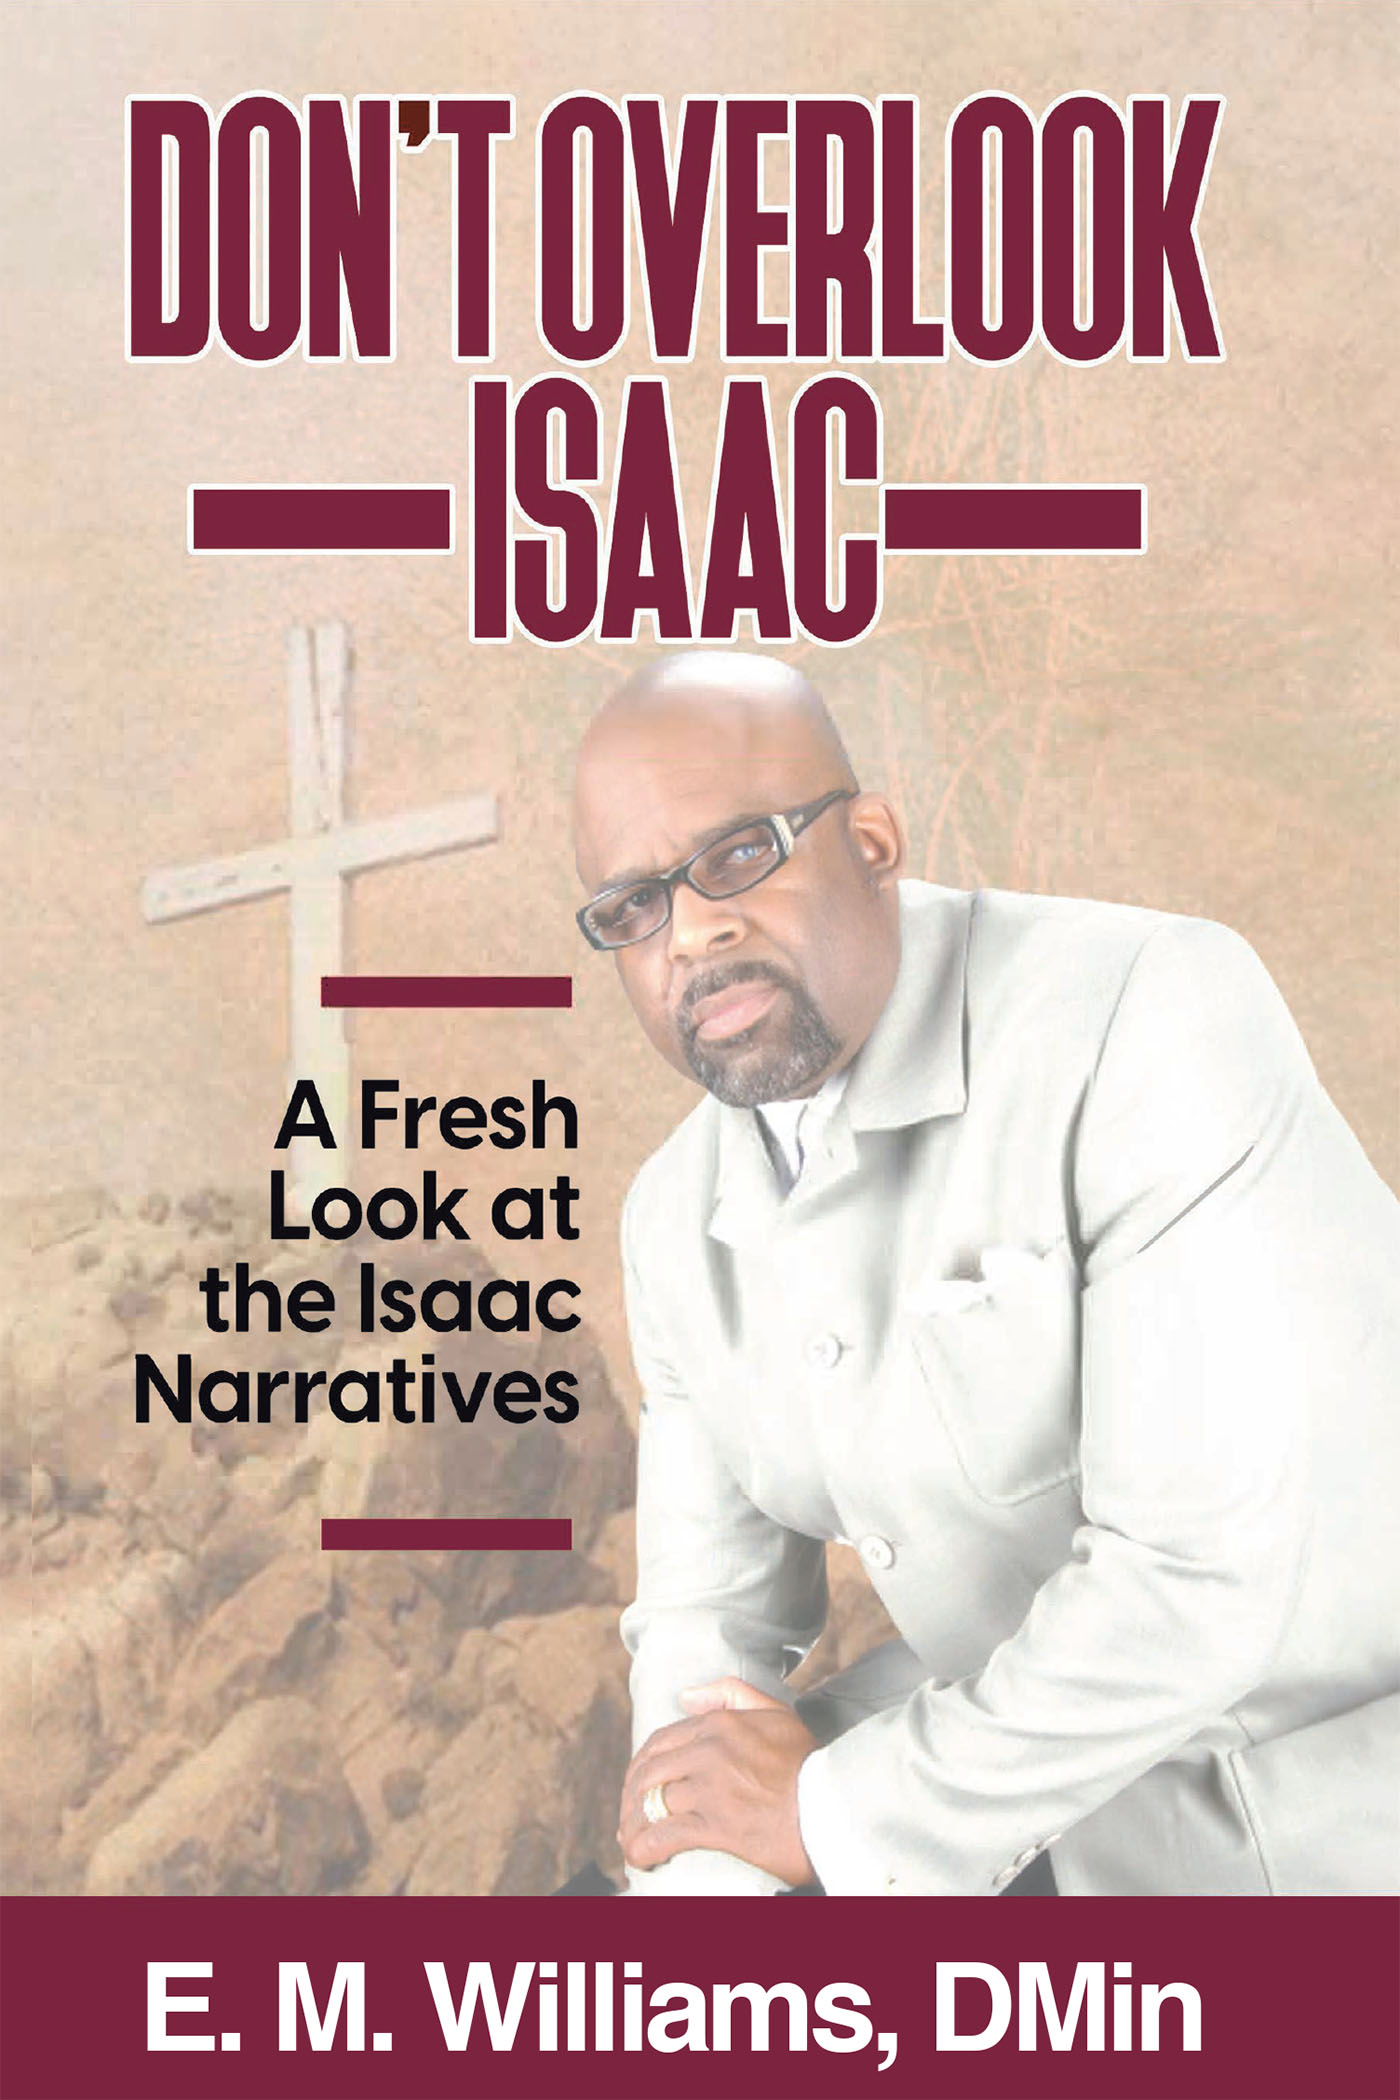 E. M. Williams, DMin’s Newly Released “Don’t Overlook Isaac” is an Eye-Opening Discussion of an Often-Misunderstood Biblical Lesson